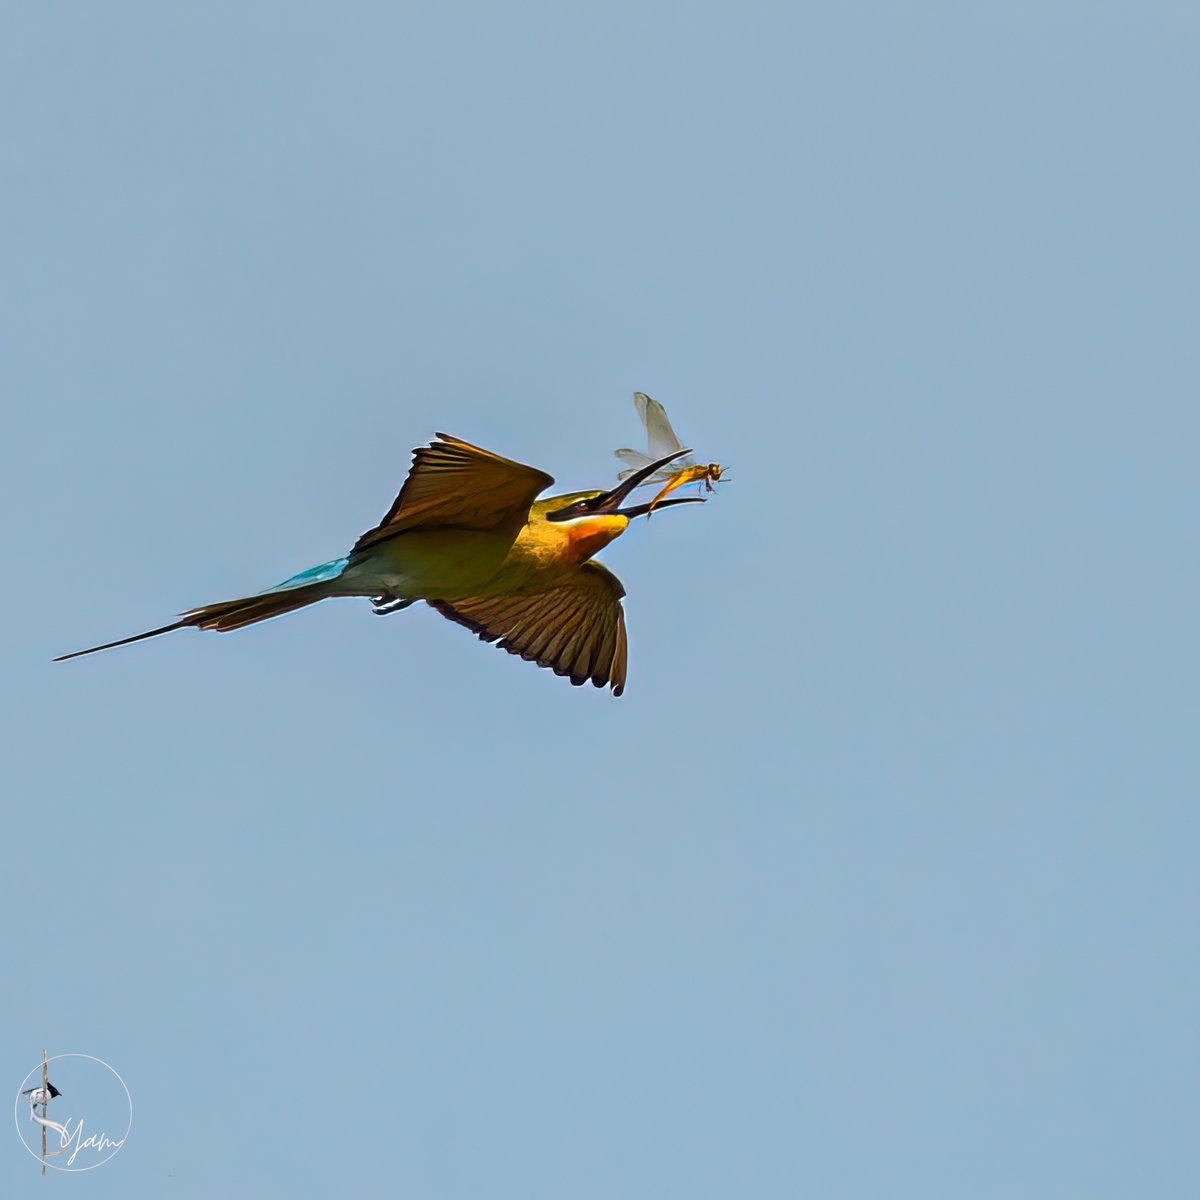 The distribution range is across India, Myanmar and Southeast Asia, they are winter visitors to this part.

Blue-tailed Bee-eater catching a dragonfly...
Ameenpur, Hyderabad, Telangana
Sep2023

#bluetailedbeeeater

instagram.com/syampotturi/
#IndiAves #birdwatching #AmeenpurBHS